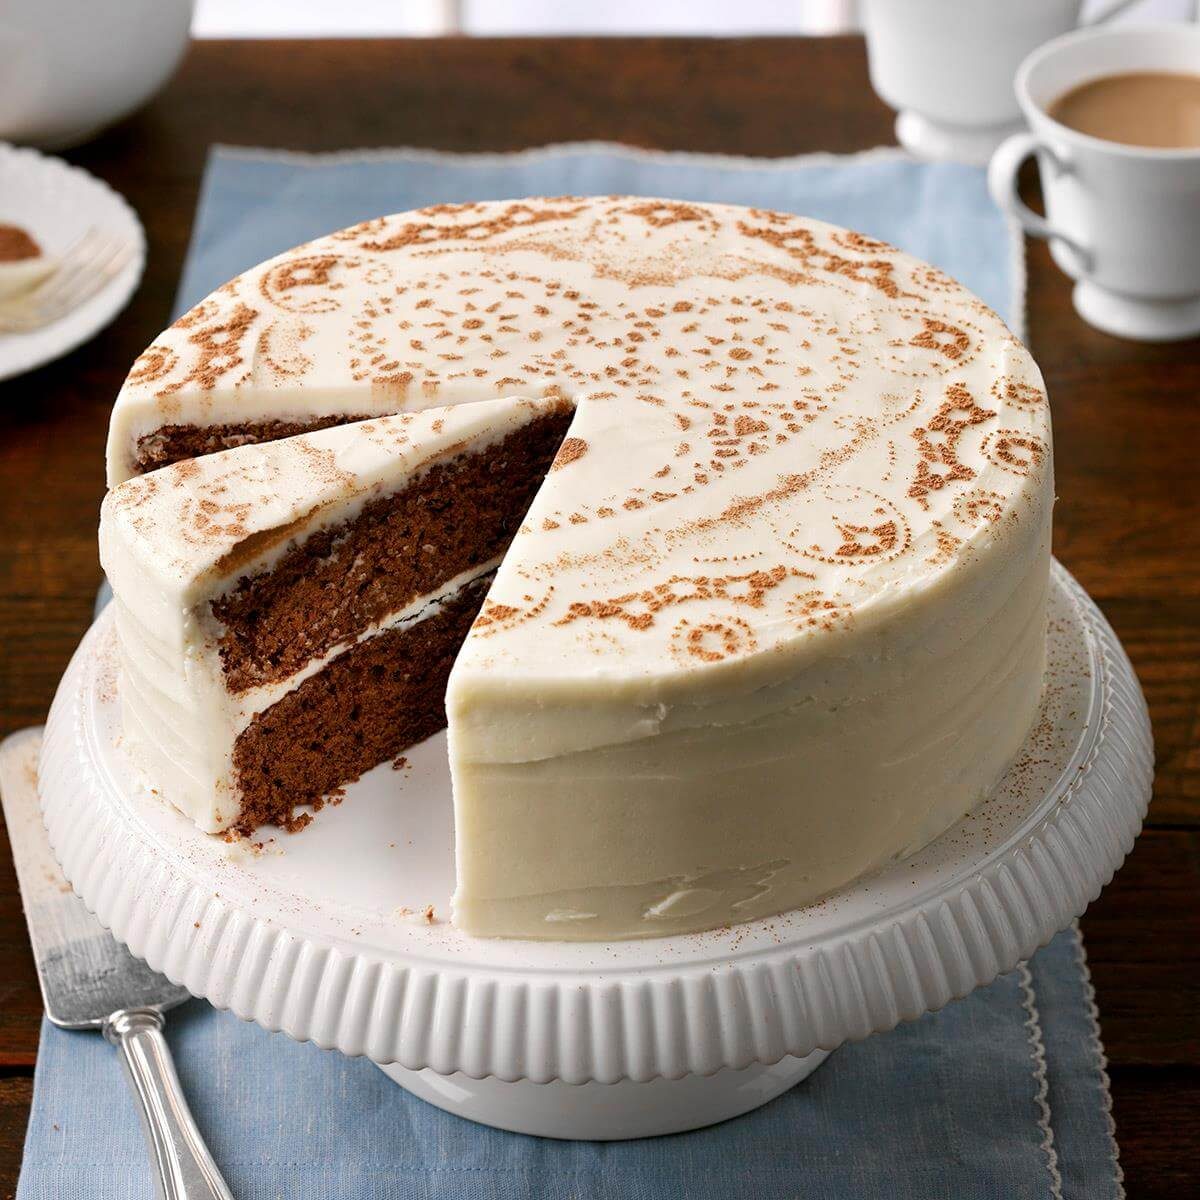 26 Classic Homemade Cakes from Scratch